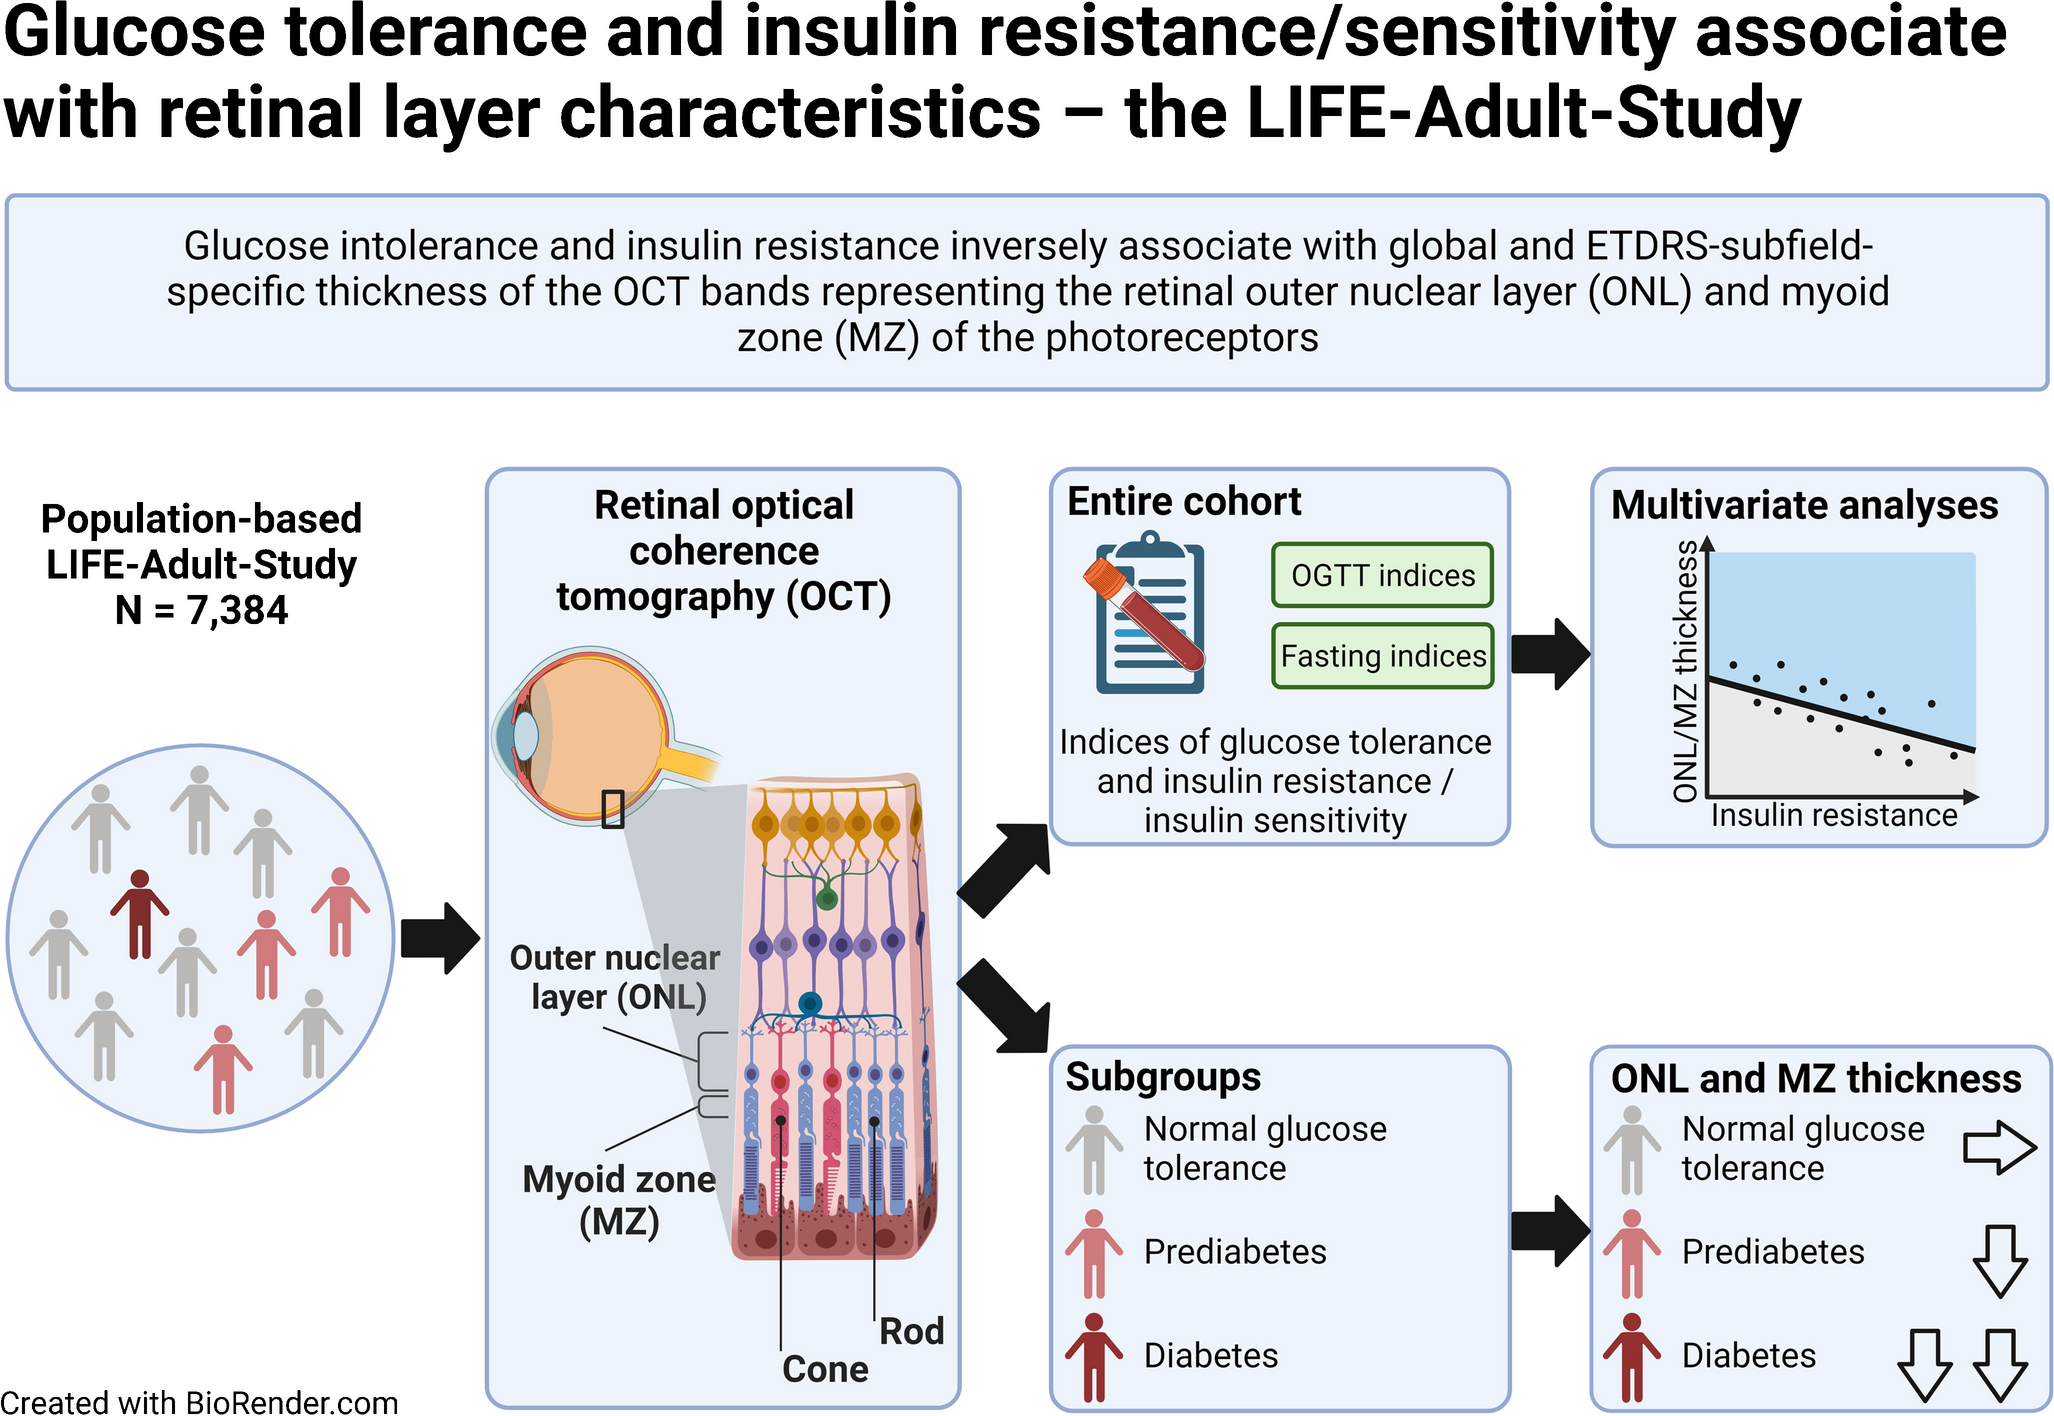 Glucose tolerance and insulin resistance/sensitivity associate with retinal layer characteristics: the LIFE-Adult-Study